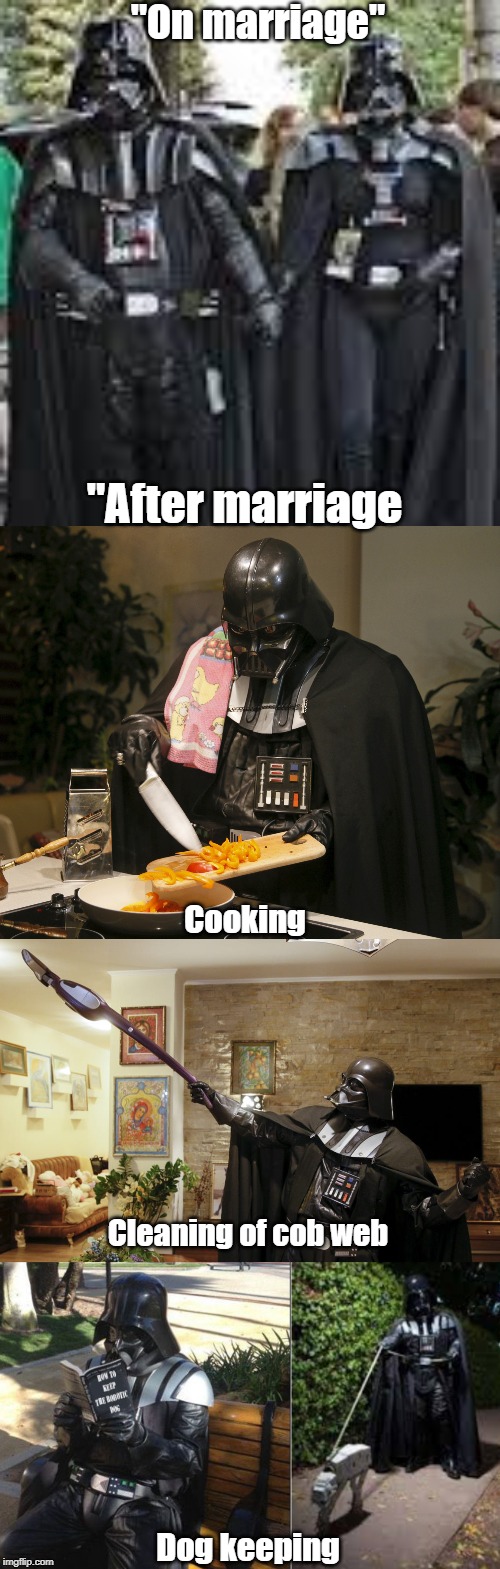 After marriage Darth Vader | "On marriage"; "After marriage; Cooking; Cleaning of cob web; Dog keeping | image tagged in darth vader | made w/ Imgflip meme maker